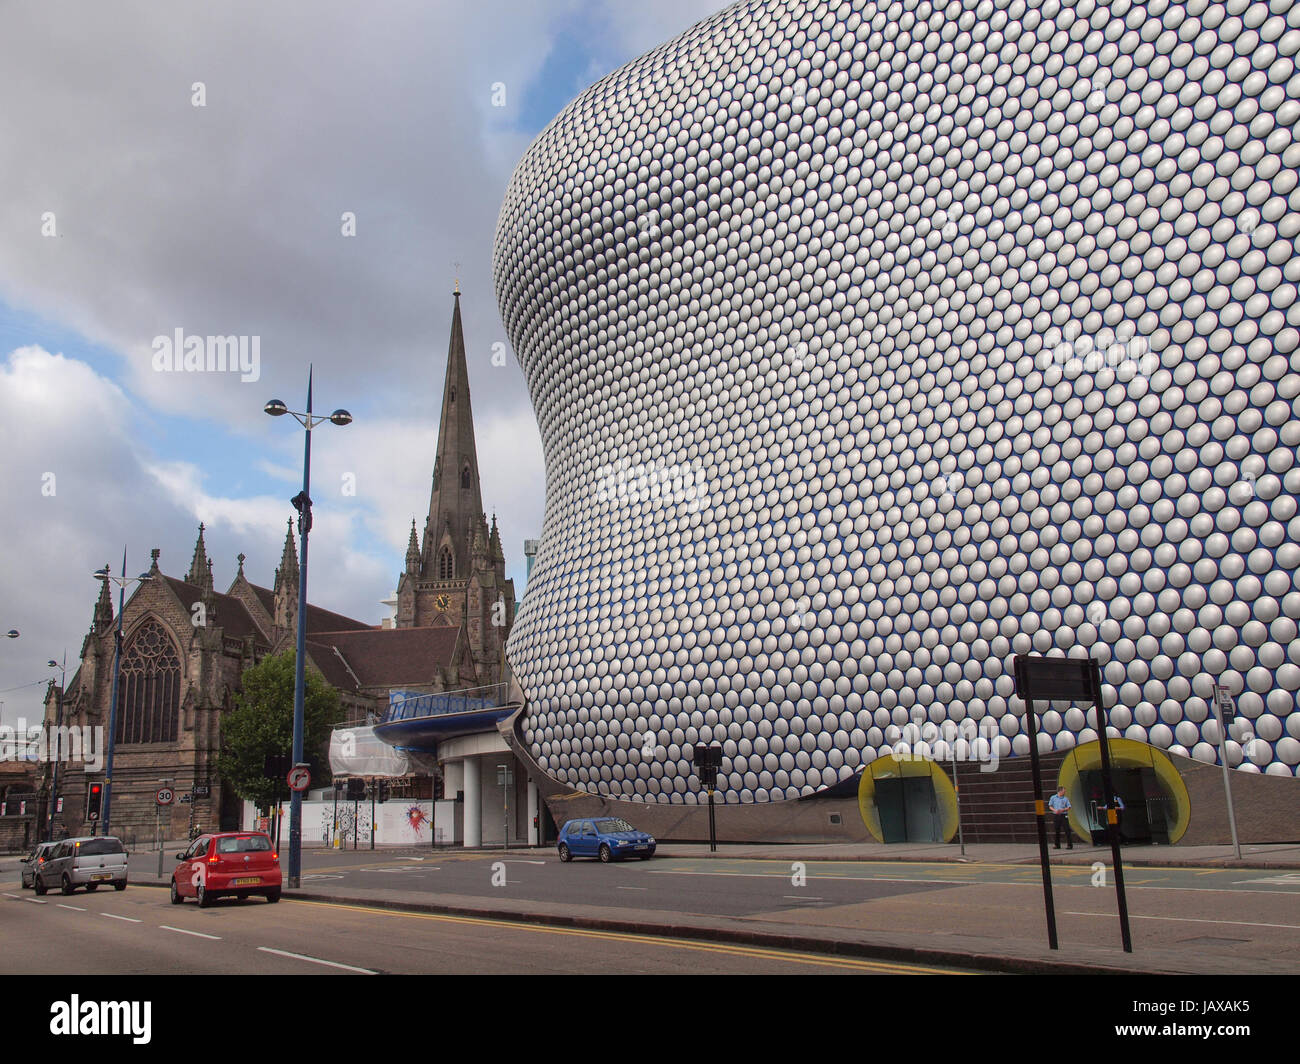 BIRMINGHAM, ENGLAND, UK - SEPTEMBER 23, 2011: The new Bull Ring shopping centre was designed by Future Systems architects for Selfridges, following an organic form inspired by the Fibonacci sequence Stock Photo